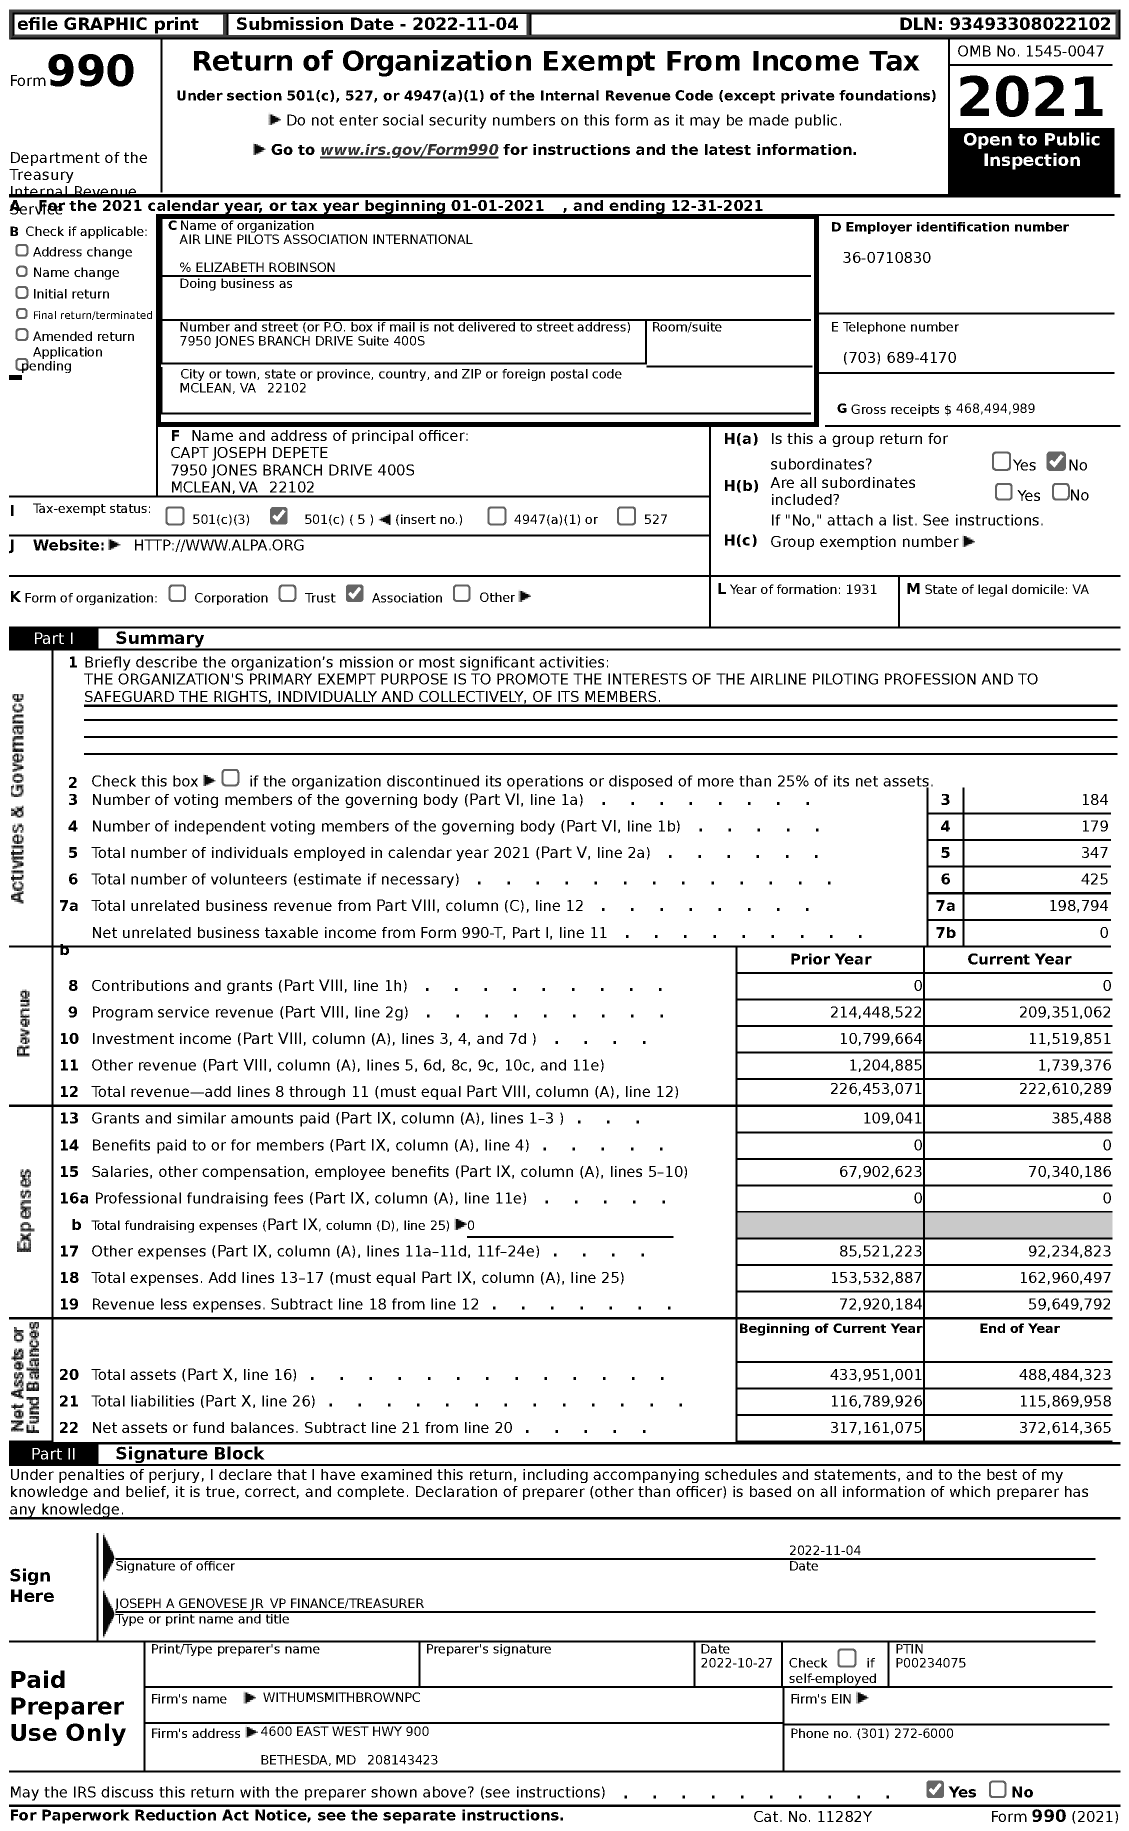 Image of first page of 2021 Form 990 for Air Line Pilots Association International (ALPA)